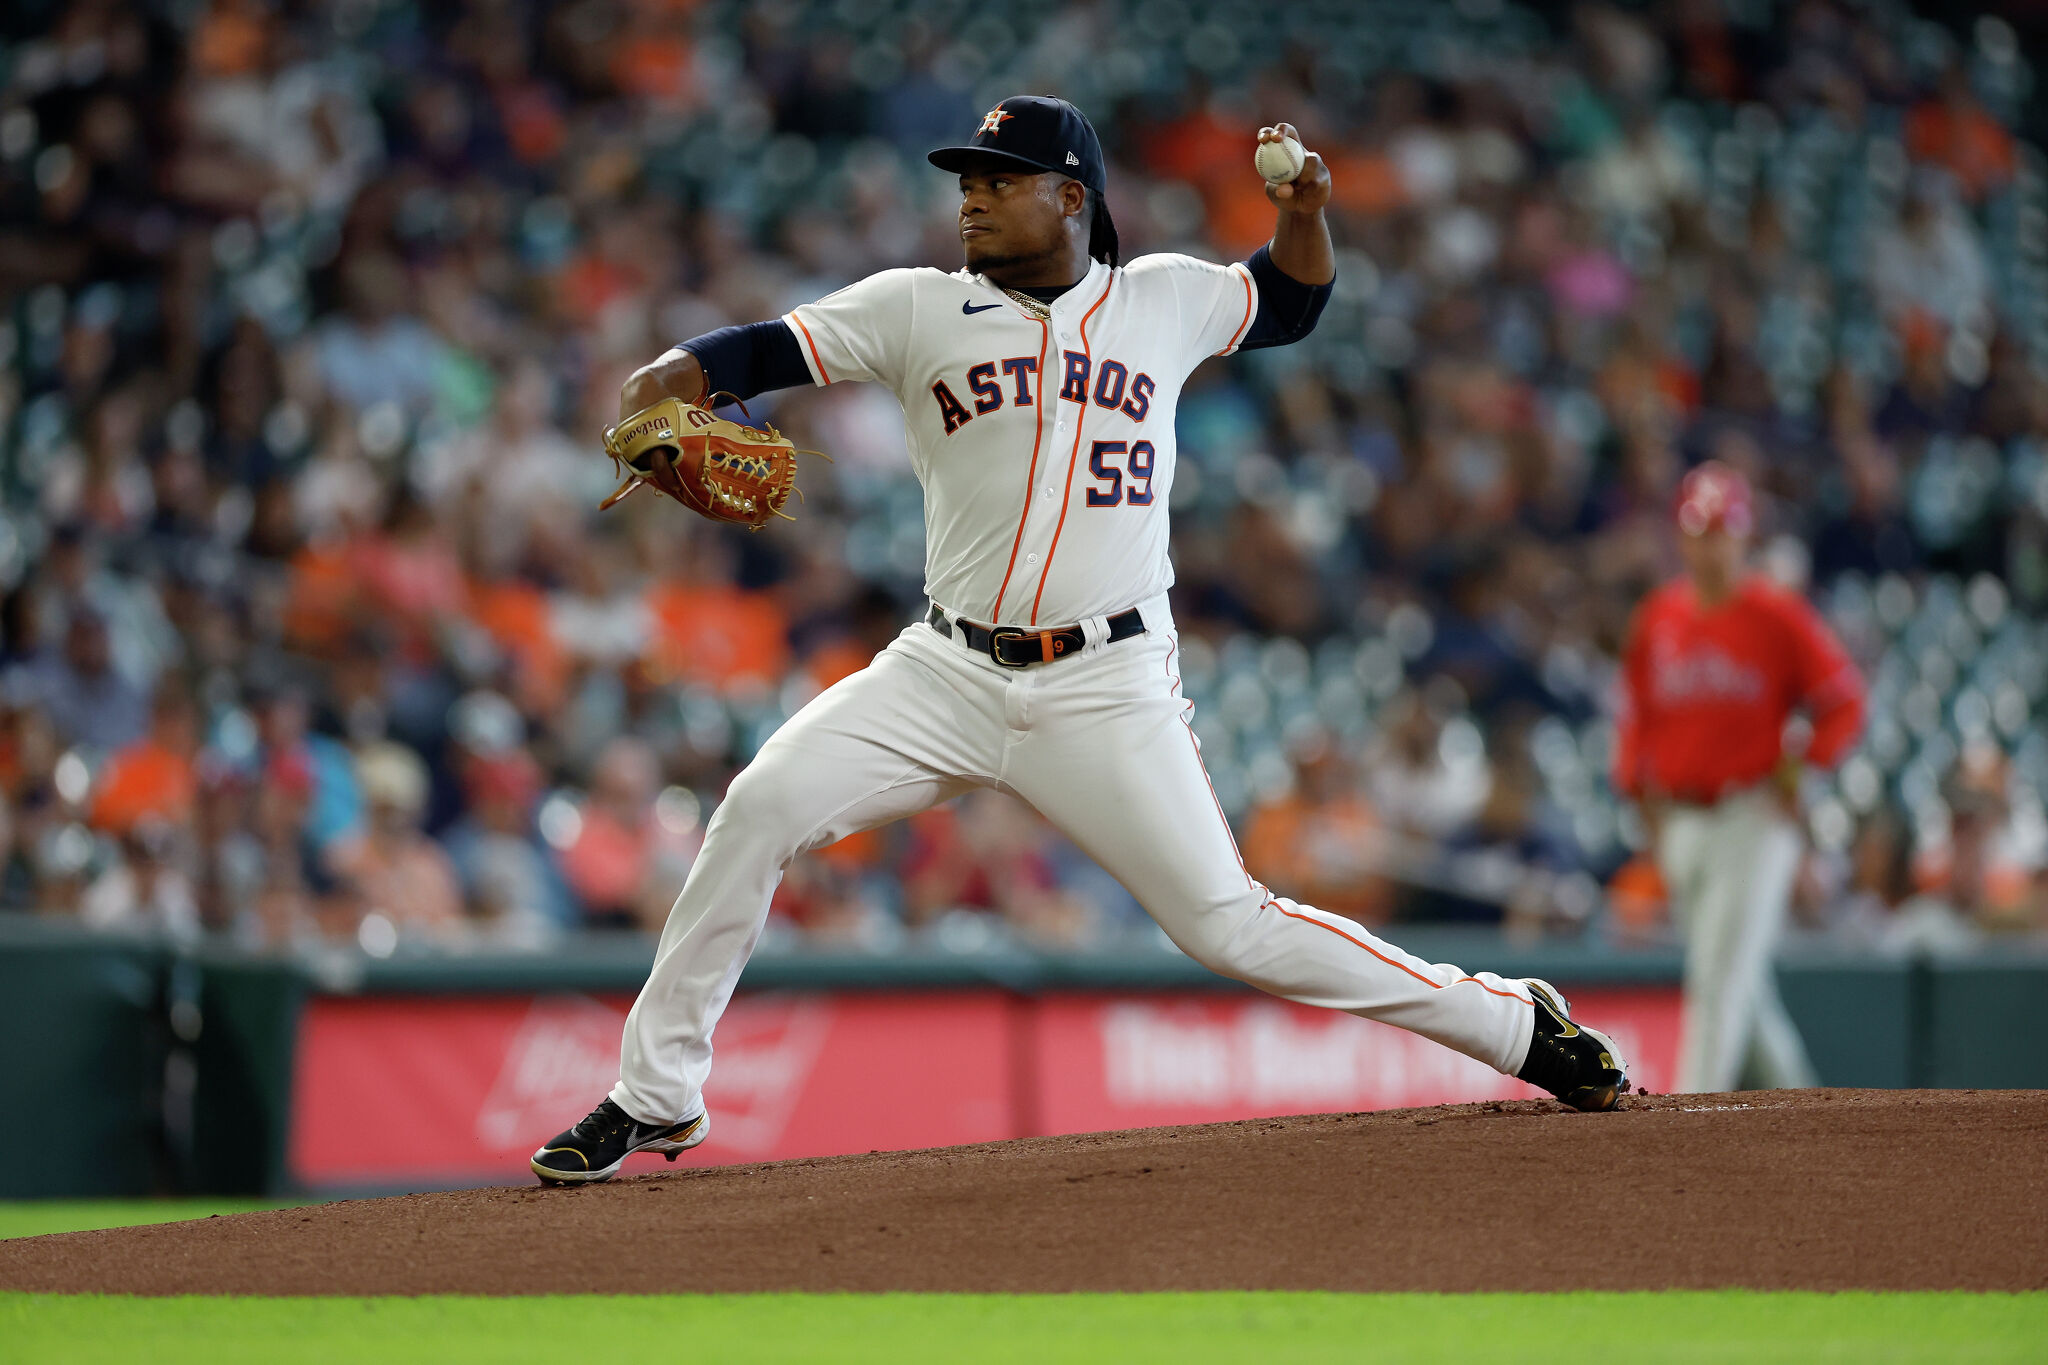 Astros franchise record showcases pitching, defensive prowess